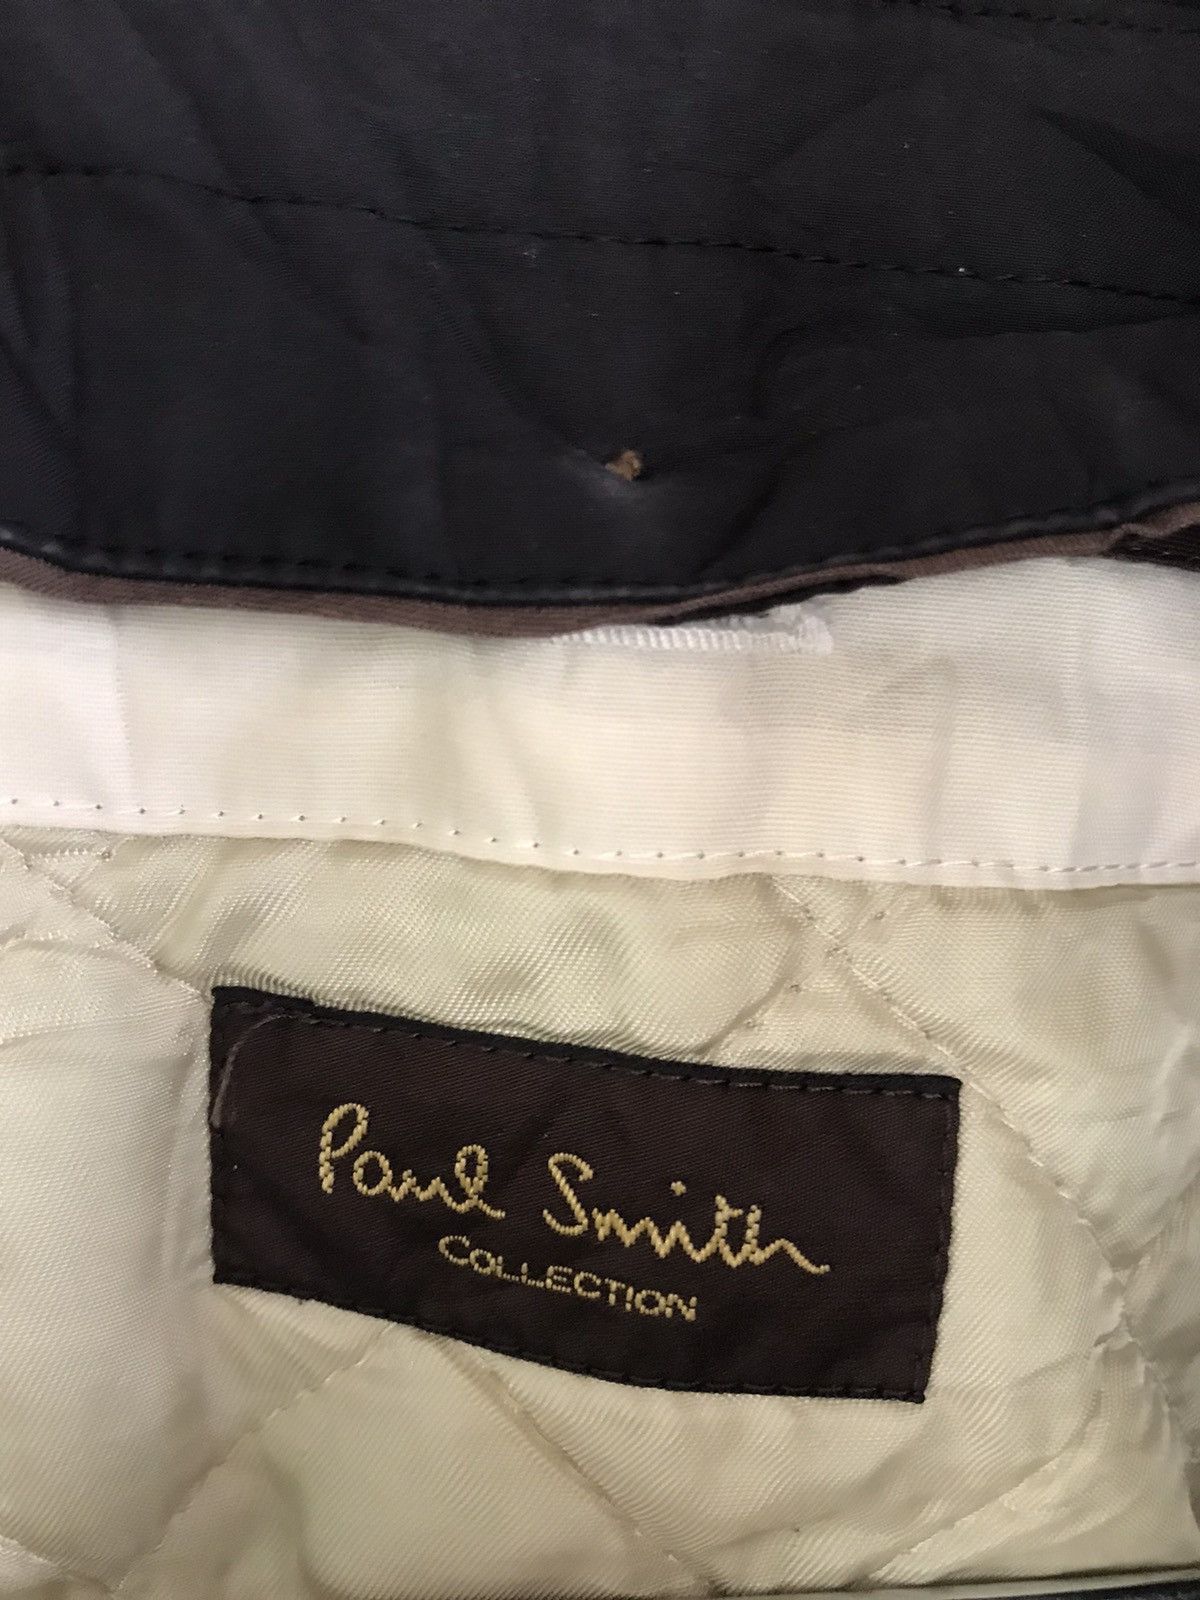 Paul Smith Collection Trench Coat - 10